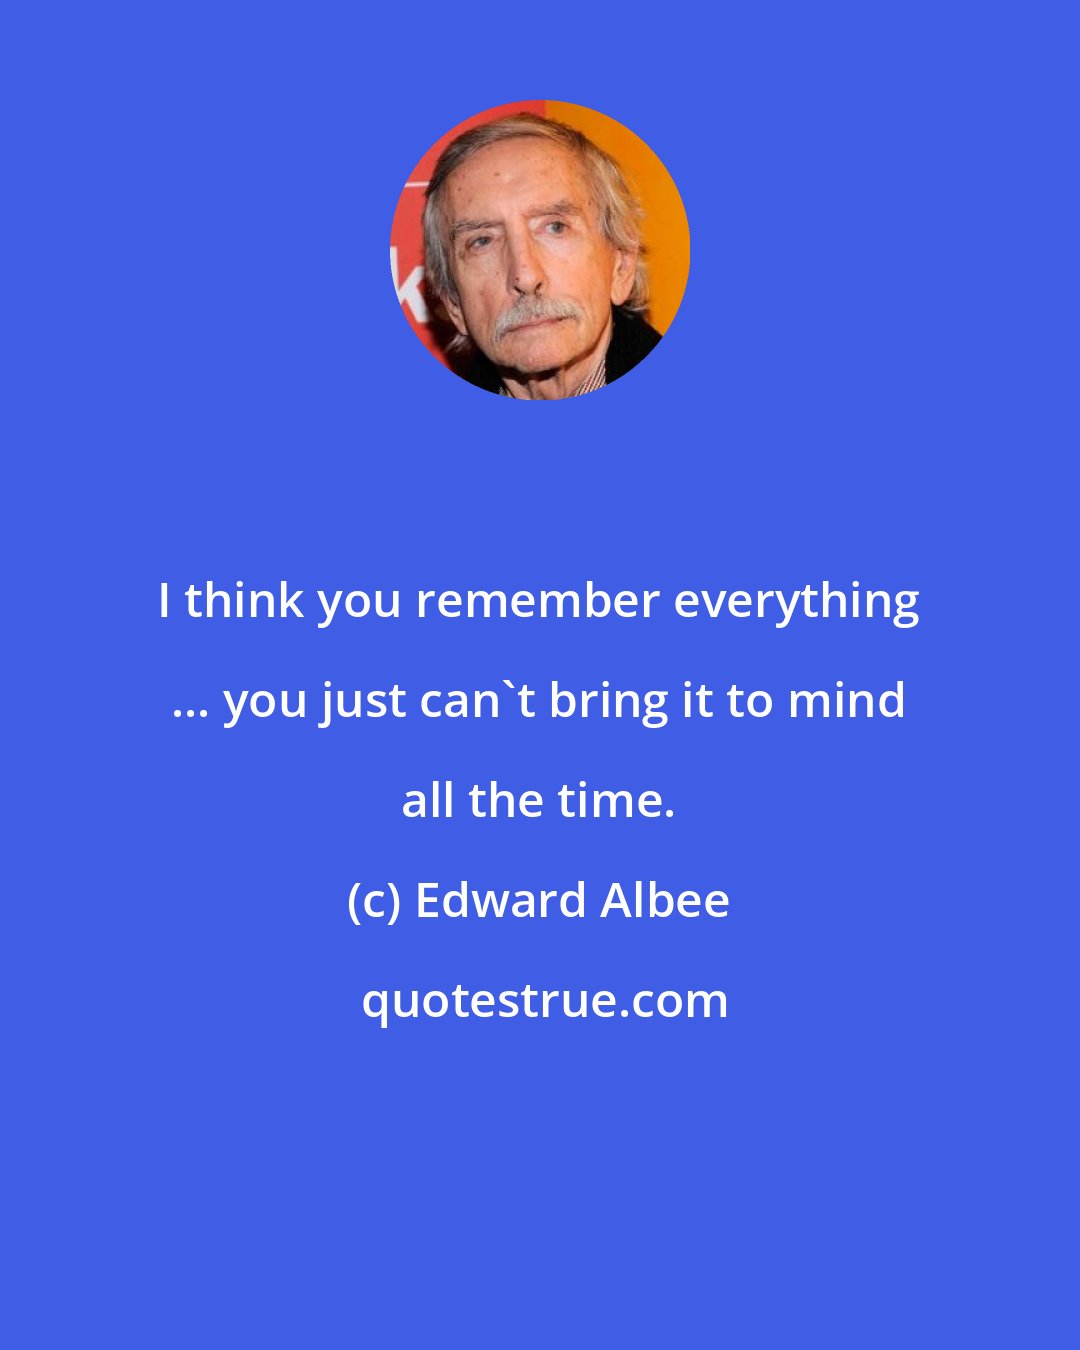 Edward Albee: I think you remember everything ... you just can't bring it to mind all the time.